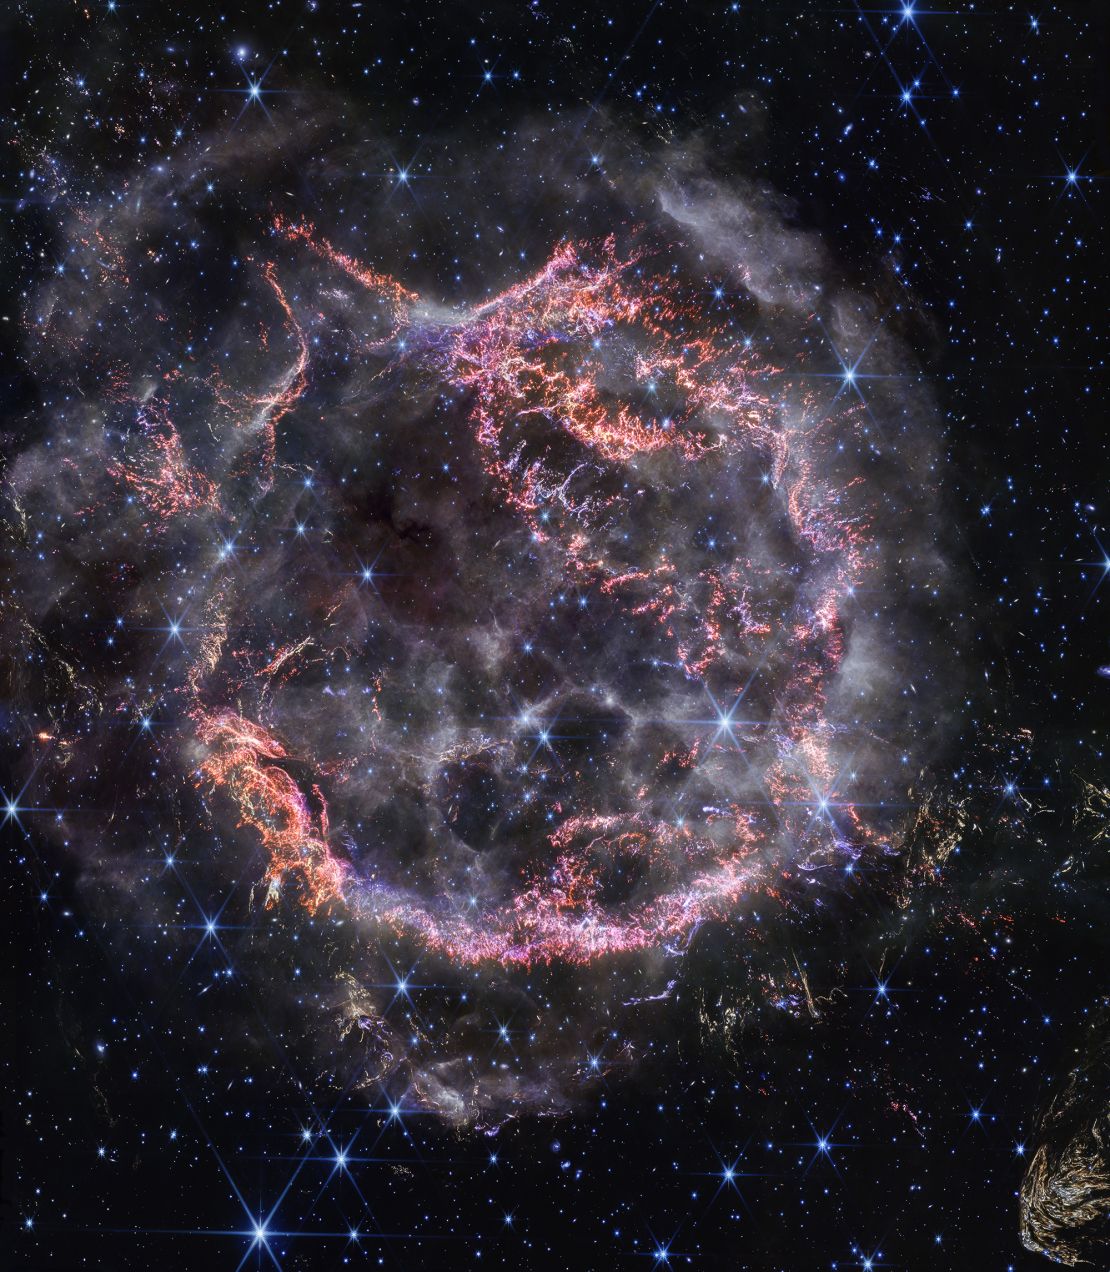 A new high-definition image from the NASA/ESA/CSA James Webb Space Telescope's NIRCam (Near-Infrared Camera) unveils intricate details of supernova remnant Cassiopeia A (Cas A), and shows the expanding shell of material slamming into the gas shed by the star before it exploded. The most noticeable colours in Webb's newest image are clumps of bright orange and light pink that make up the inner shell of the supernova remnant. These tiny knots of gas, composed of sulphur, oxygen, argon, and neon from the star itself, are only detectable thanks to NIRCam's exquisite resolution, and give researchers a hint at how the dying star shattered like glass when it exploded. The outskirts of the main inner shell look like smoke from a campfire. This marks where ejected material from the exploded star is ramming into surrounding circumstellar material. Researchers have concluded that this white colour is light from synchrotron radiation, which is generated by charged particles travelling at extremely high speeds and spiralling around magnetic field lines. There are also several light echoes visible in this image, most notably in the bottom right corner. This is where light from the star's long-ago explosion has reached, and is warming, distant dust, which glows as it cools down. [Image description: A roughly circular cloud of gas and dust with complex structure. The inner shell is made of bright pink and orange filaments studded with clumps and knots that look like tiny pieces of shattered glass. Around the exterior of the inner shell, there are curtains of wispy gas that look like campfire smoke. Around and within the nebula, various stars are seen as points of blue and white light. Outside the nebula, there are also clumps of dust, coloured yellow in the image.]